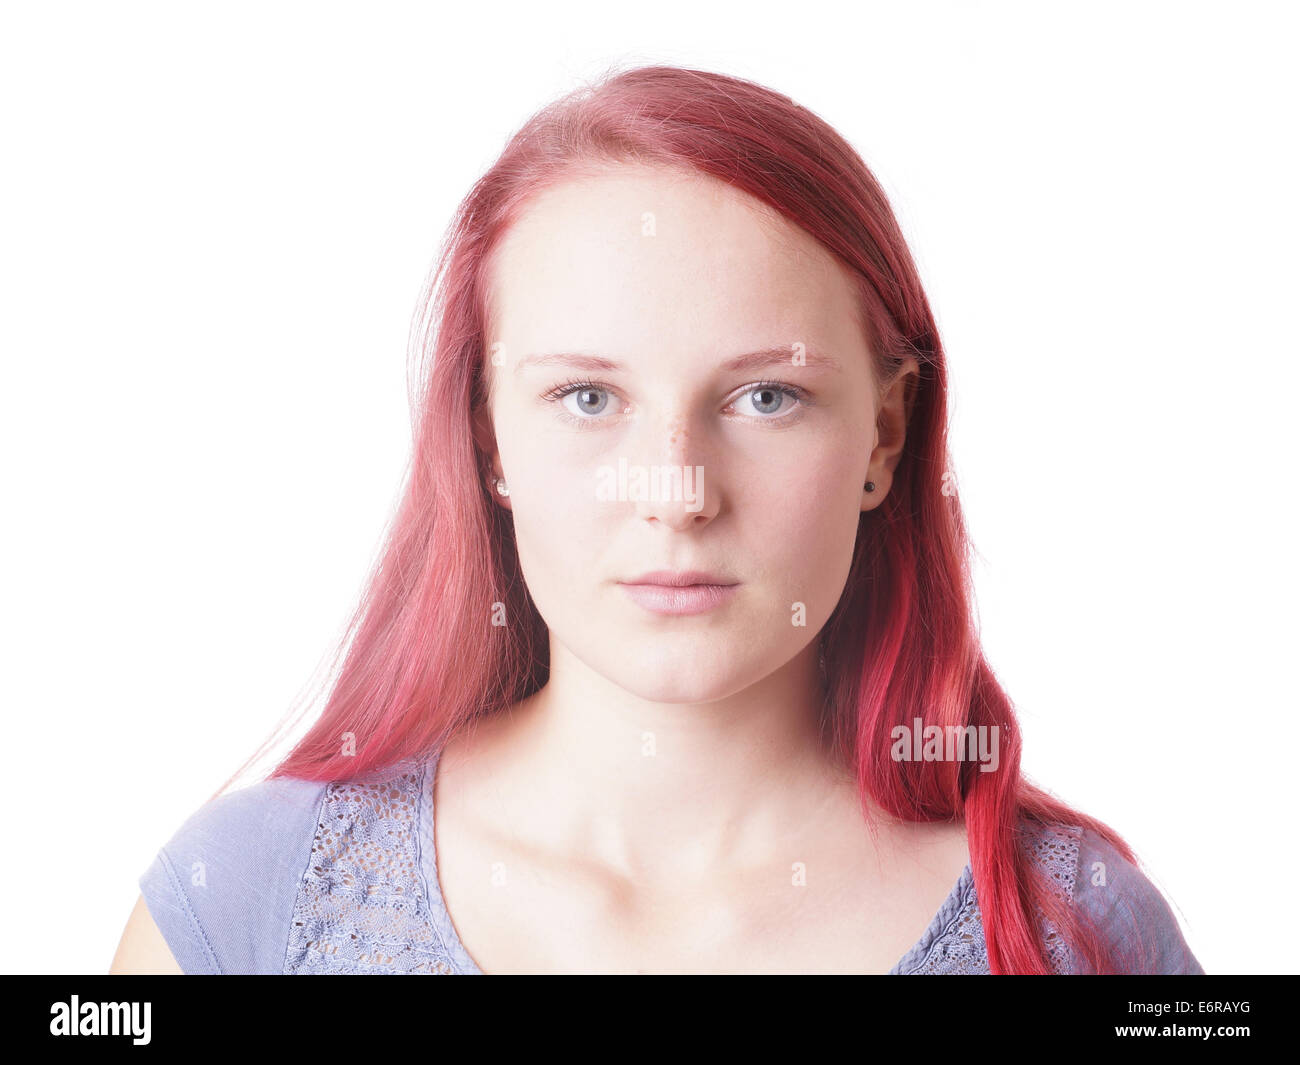 young woman with a neutral expression on her face Stock Photo